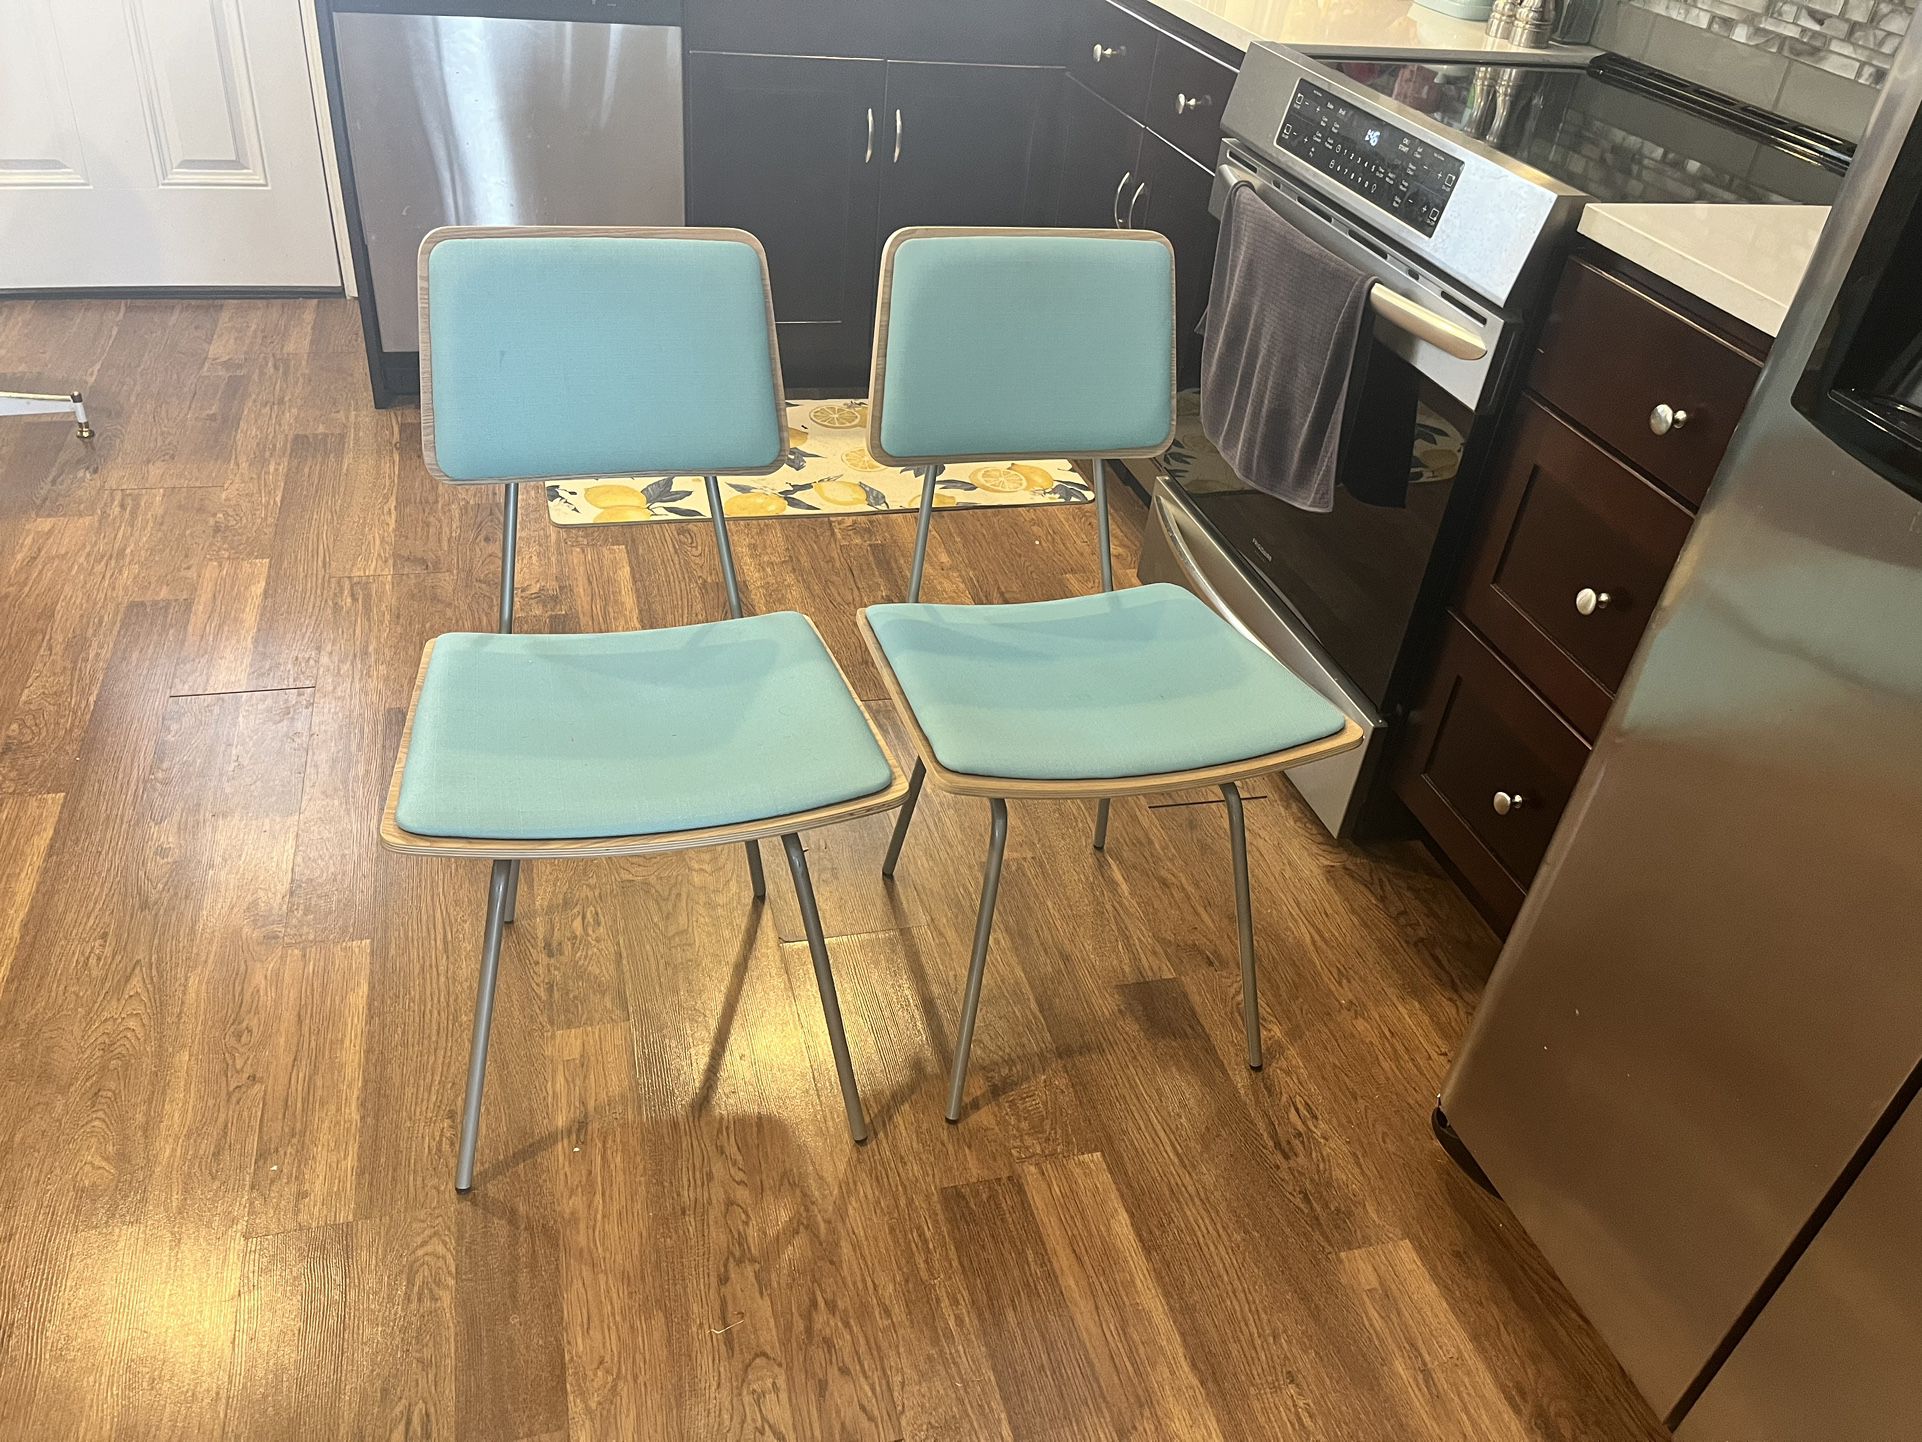 Set of Two Dining Chairs